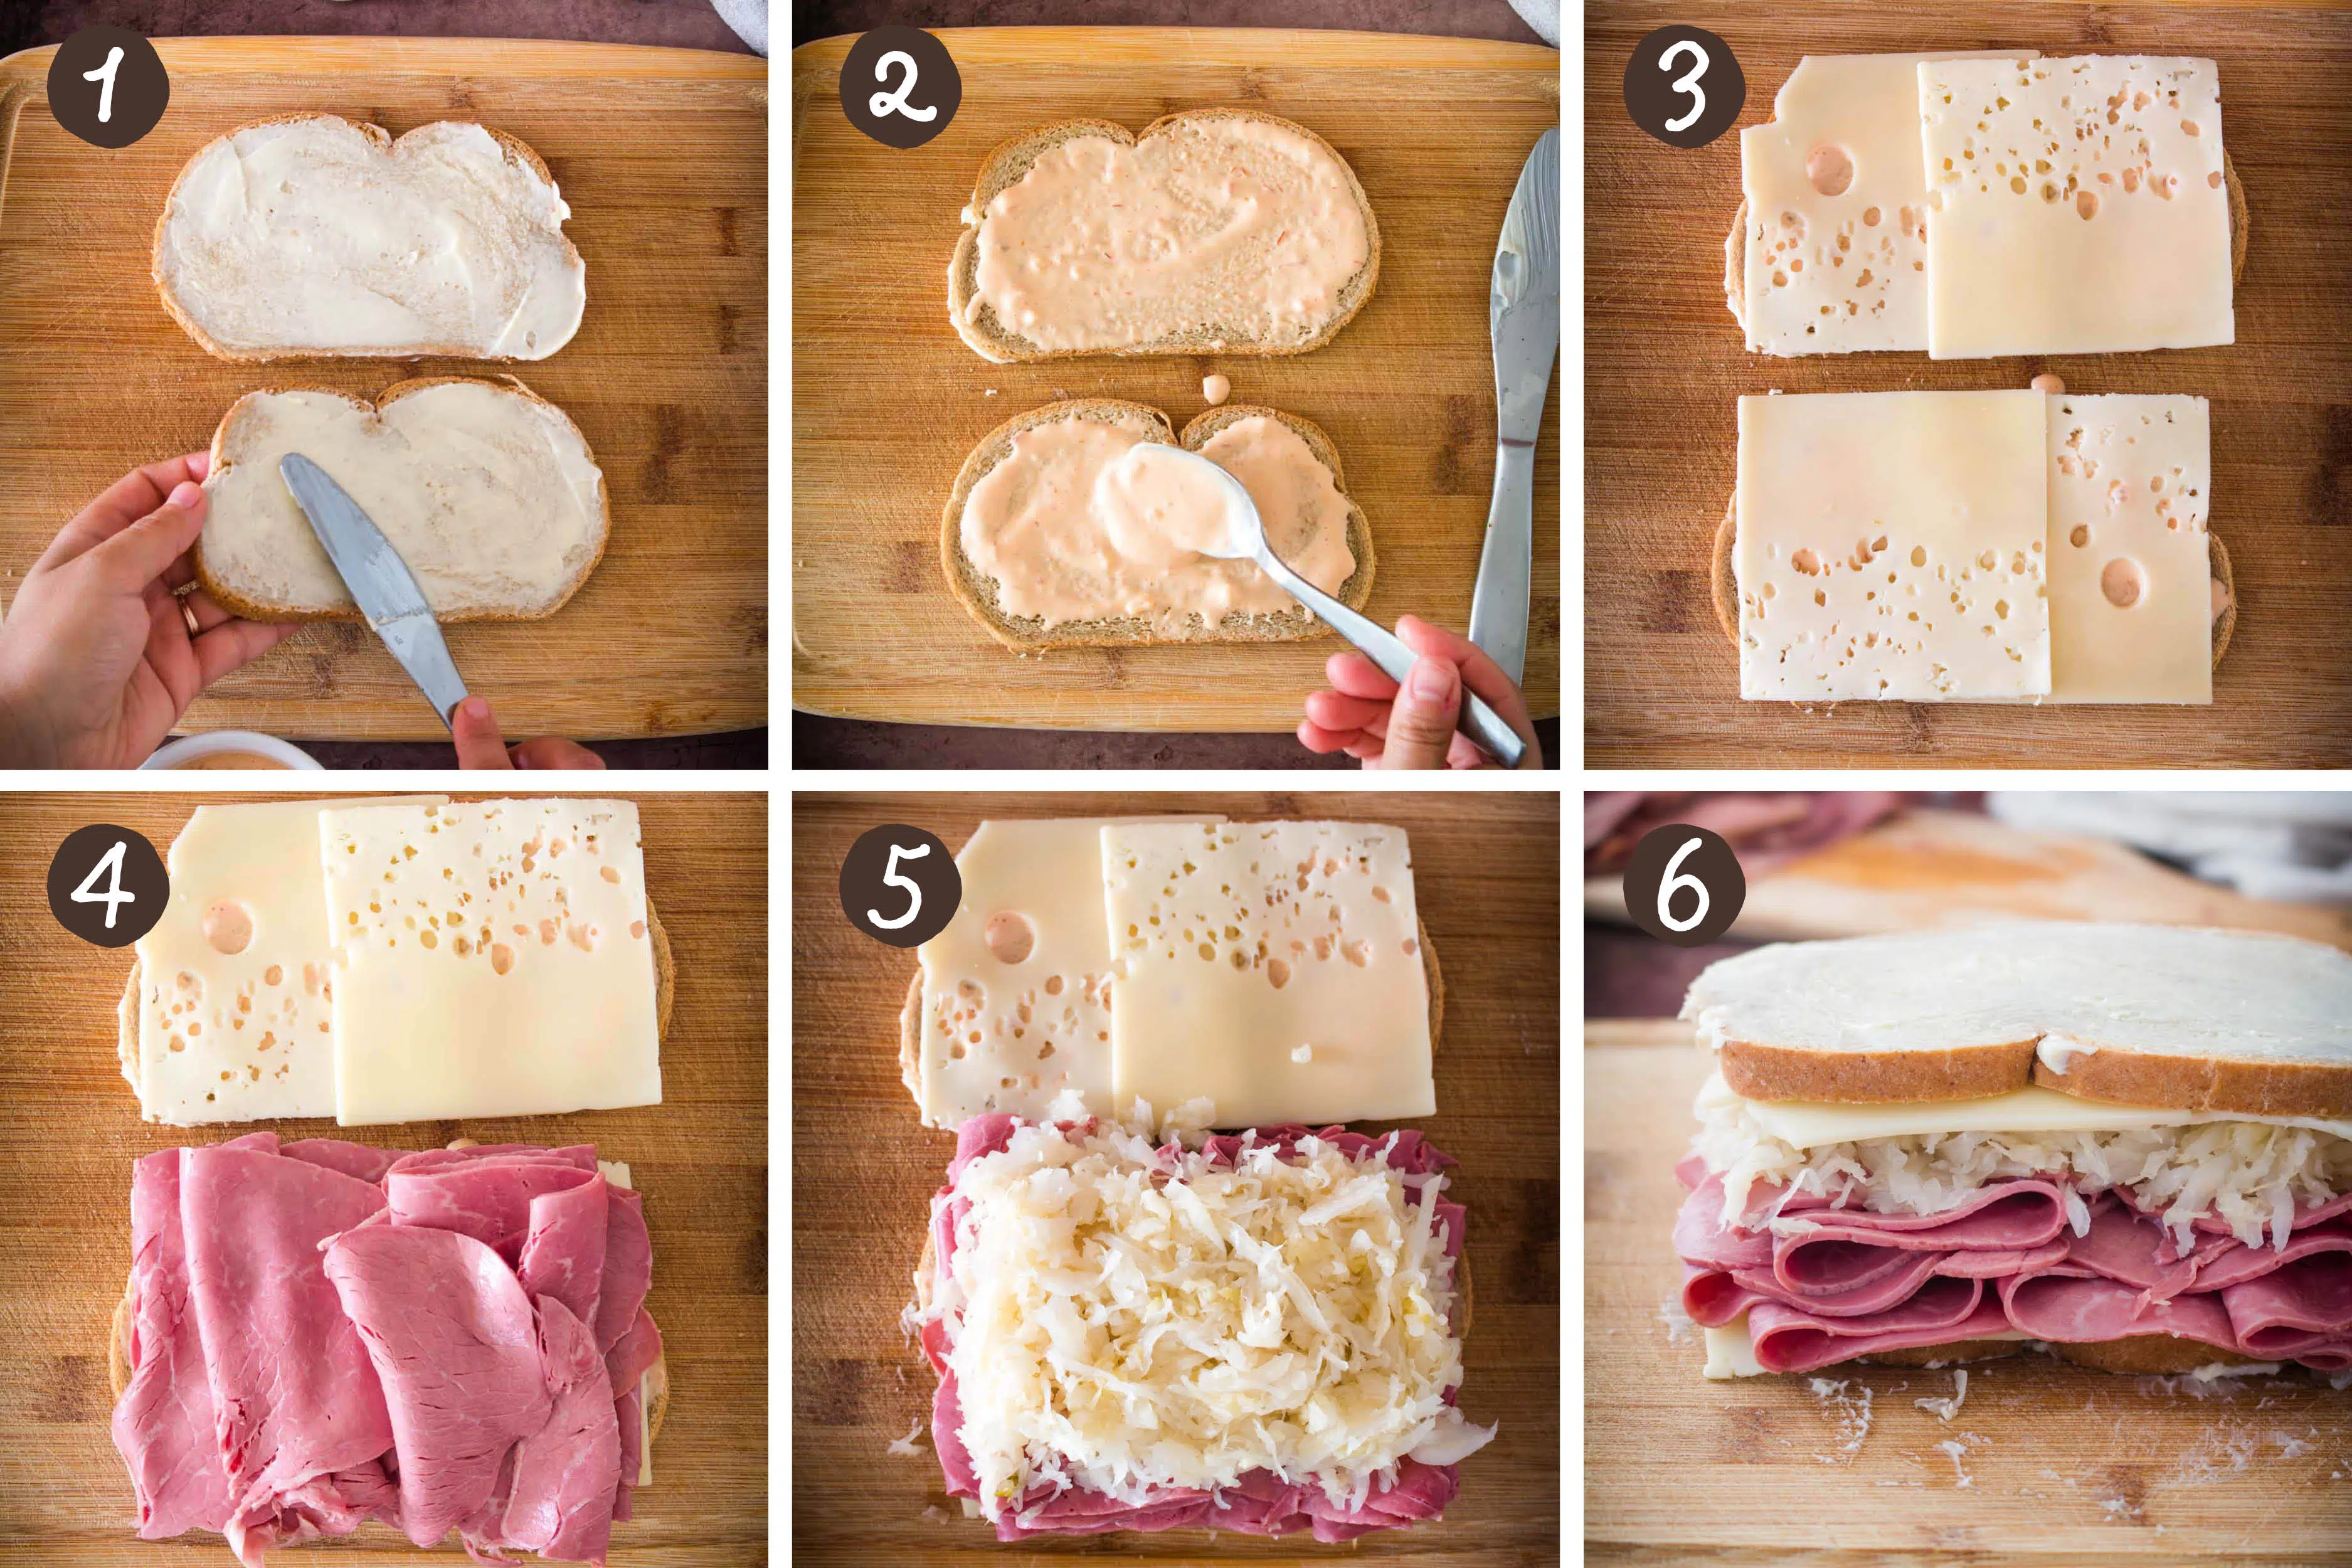 Step by step photos for how to make a traditional corned beef Reuben sandwich.